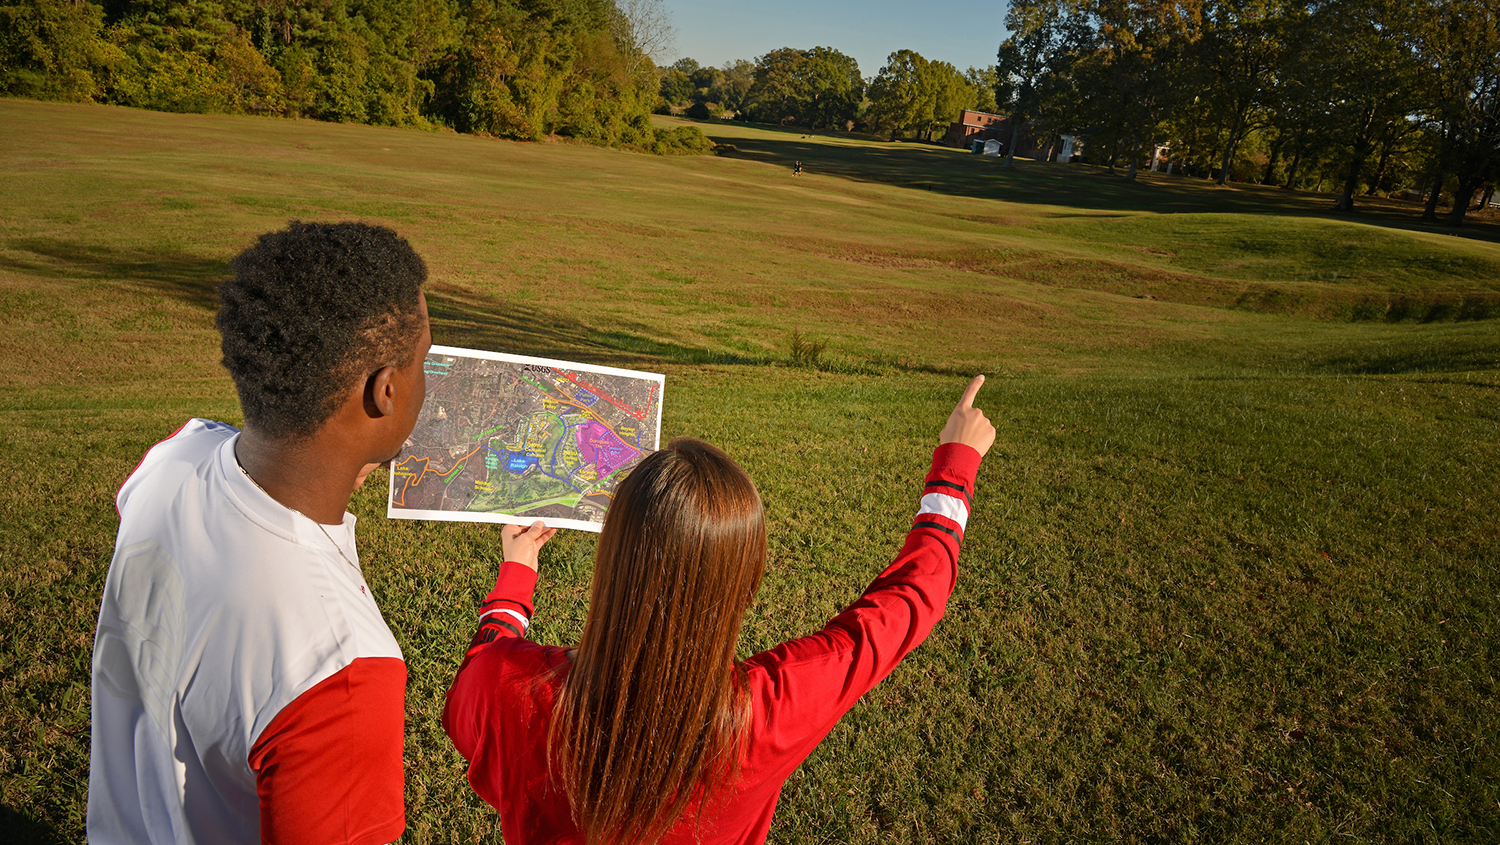 A photo of two students using a map outdoors